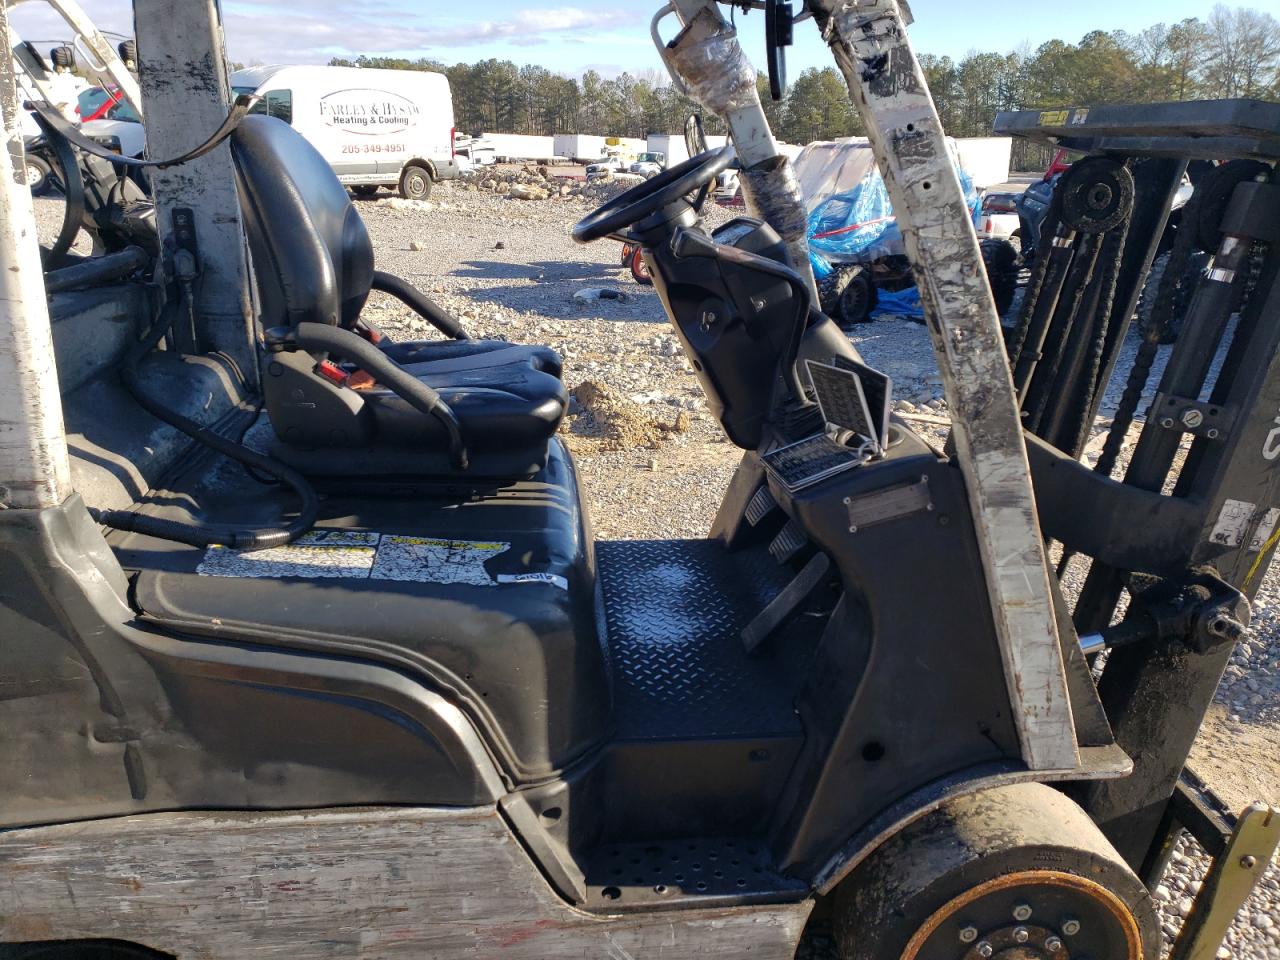 CP1F29W**** Used and Repairable 2014 Nissan Forklift in Alabama State